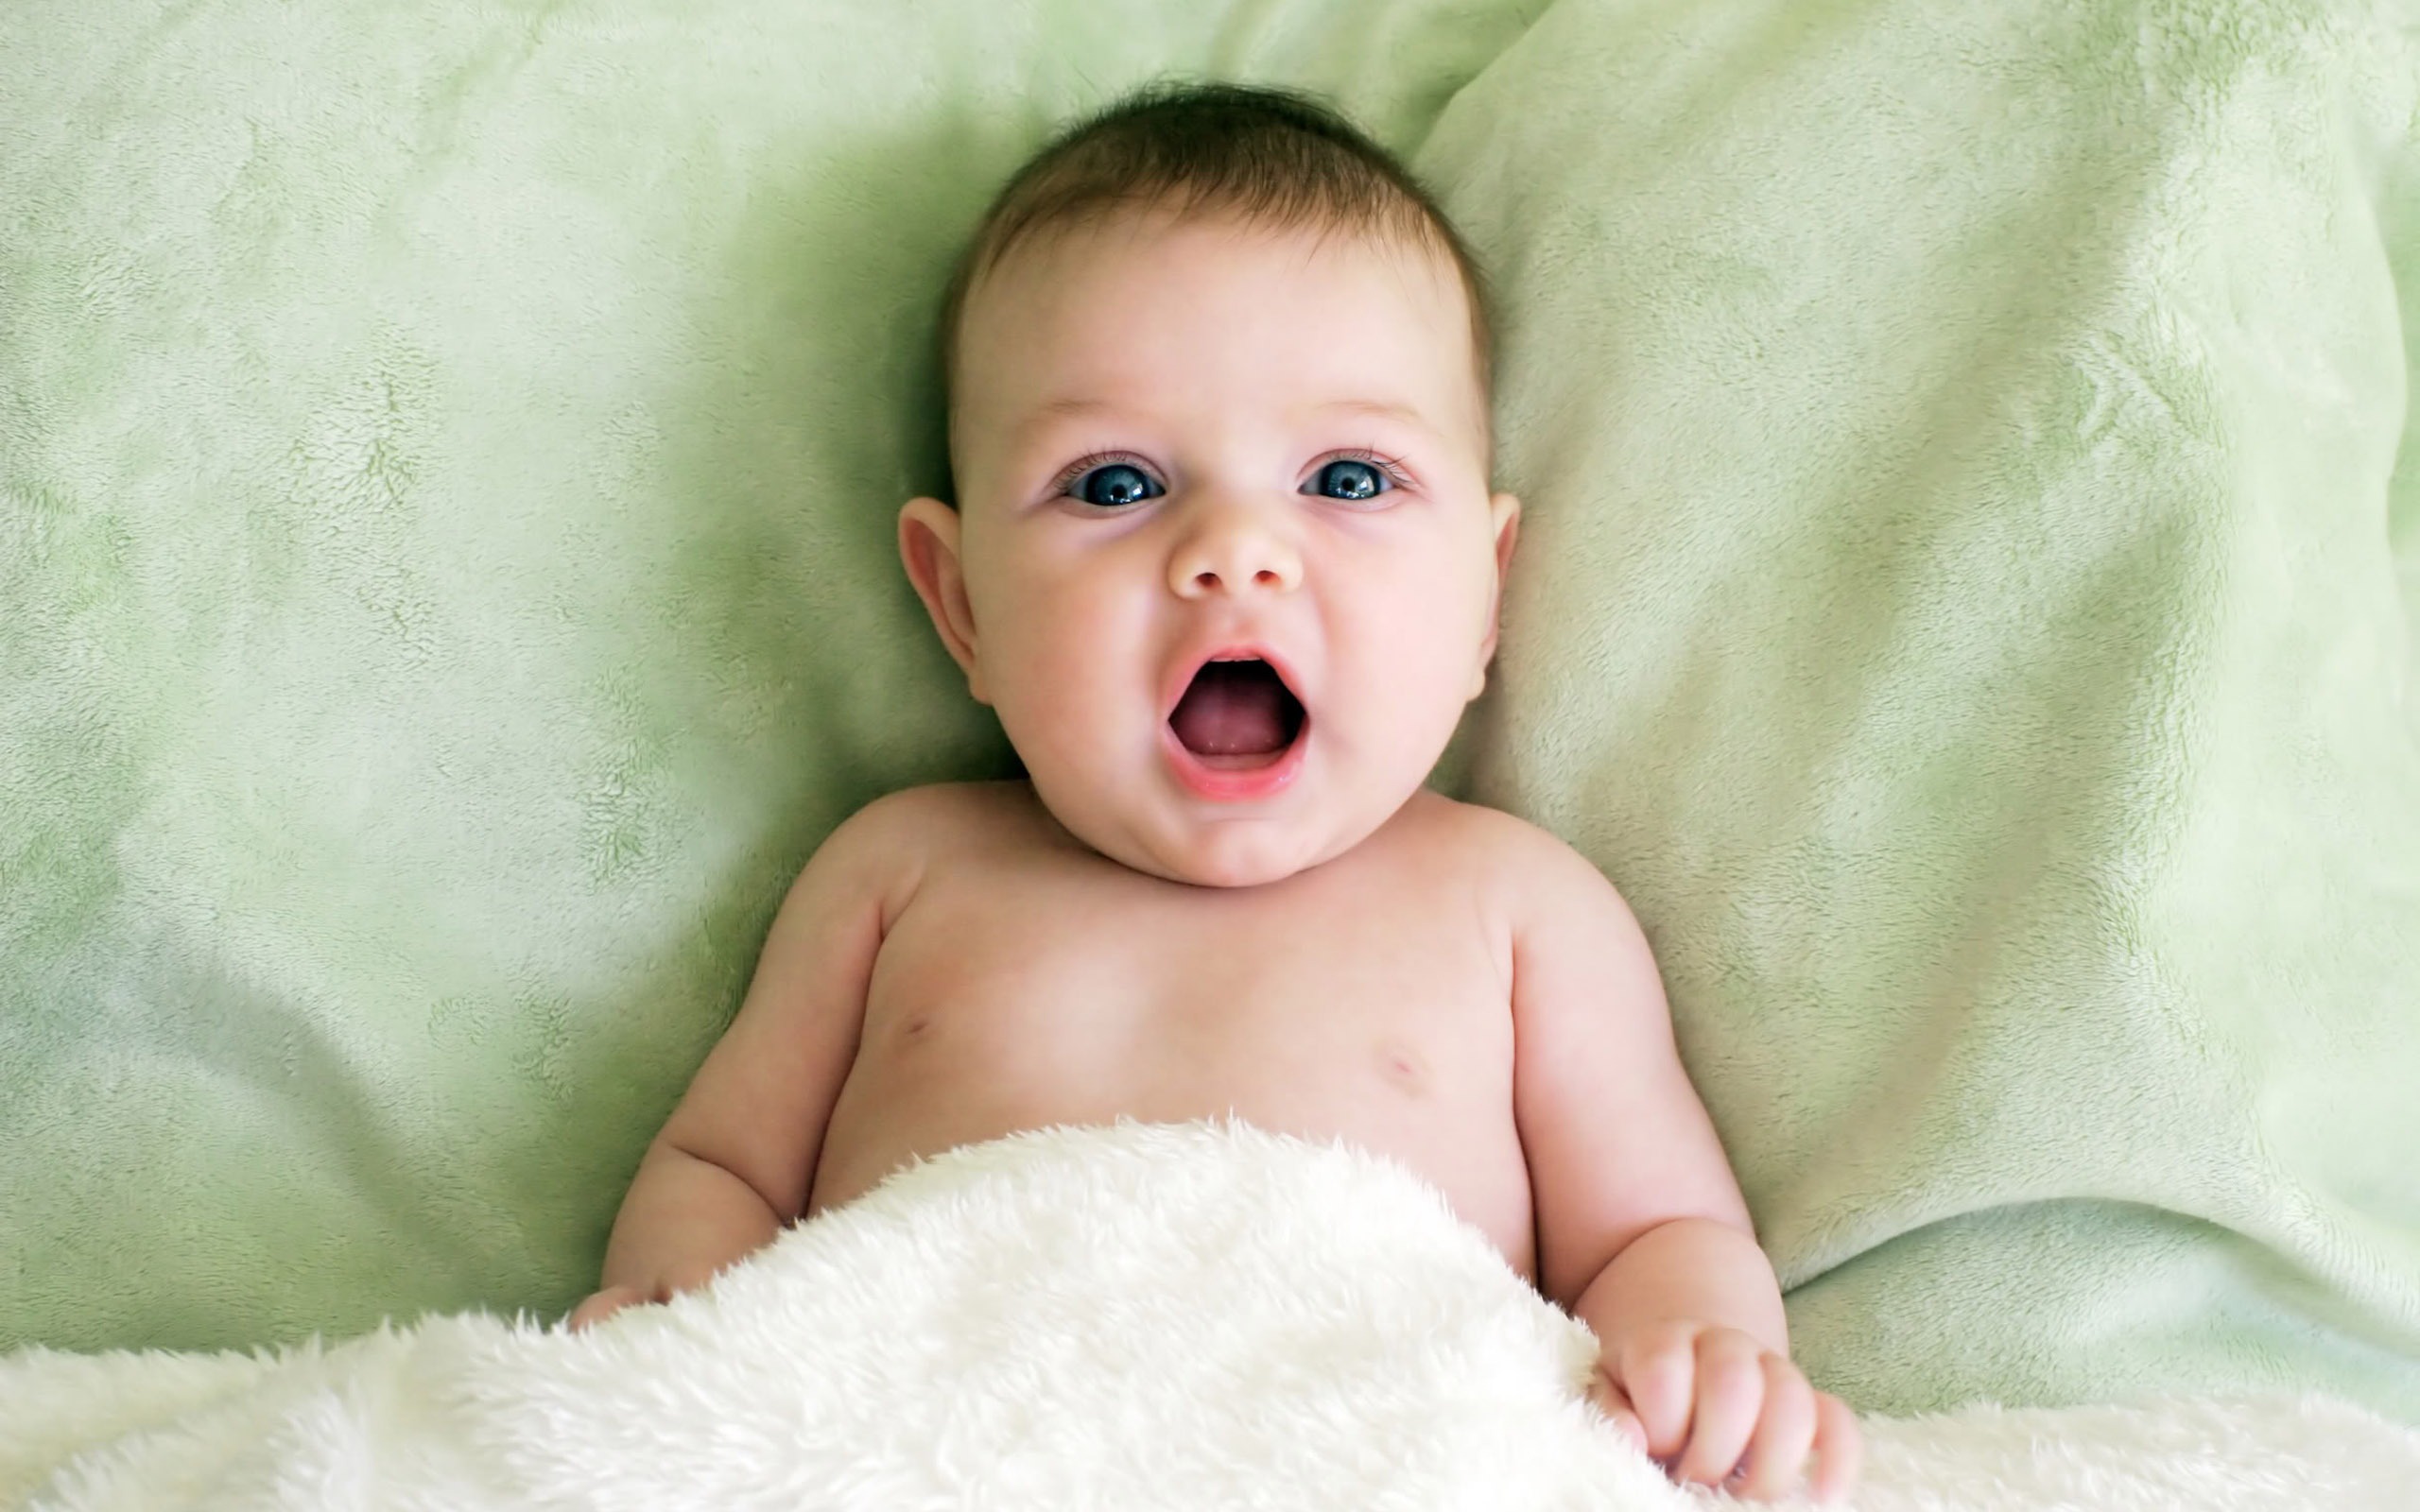 Cute Baby Wallpapers (4) #1 - 2560x1600